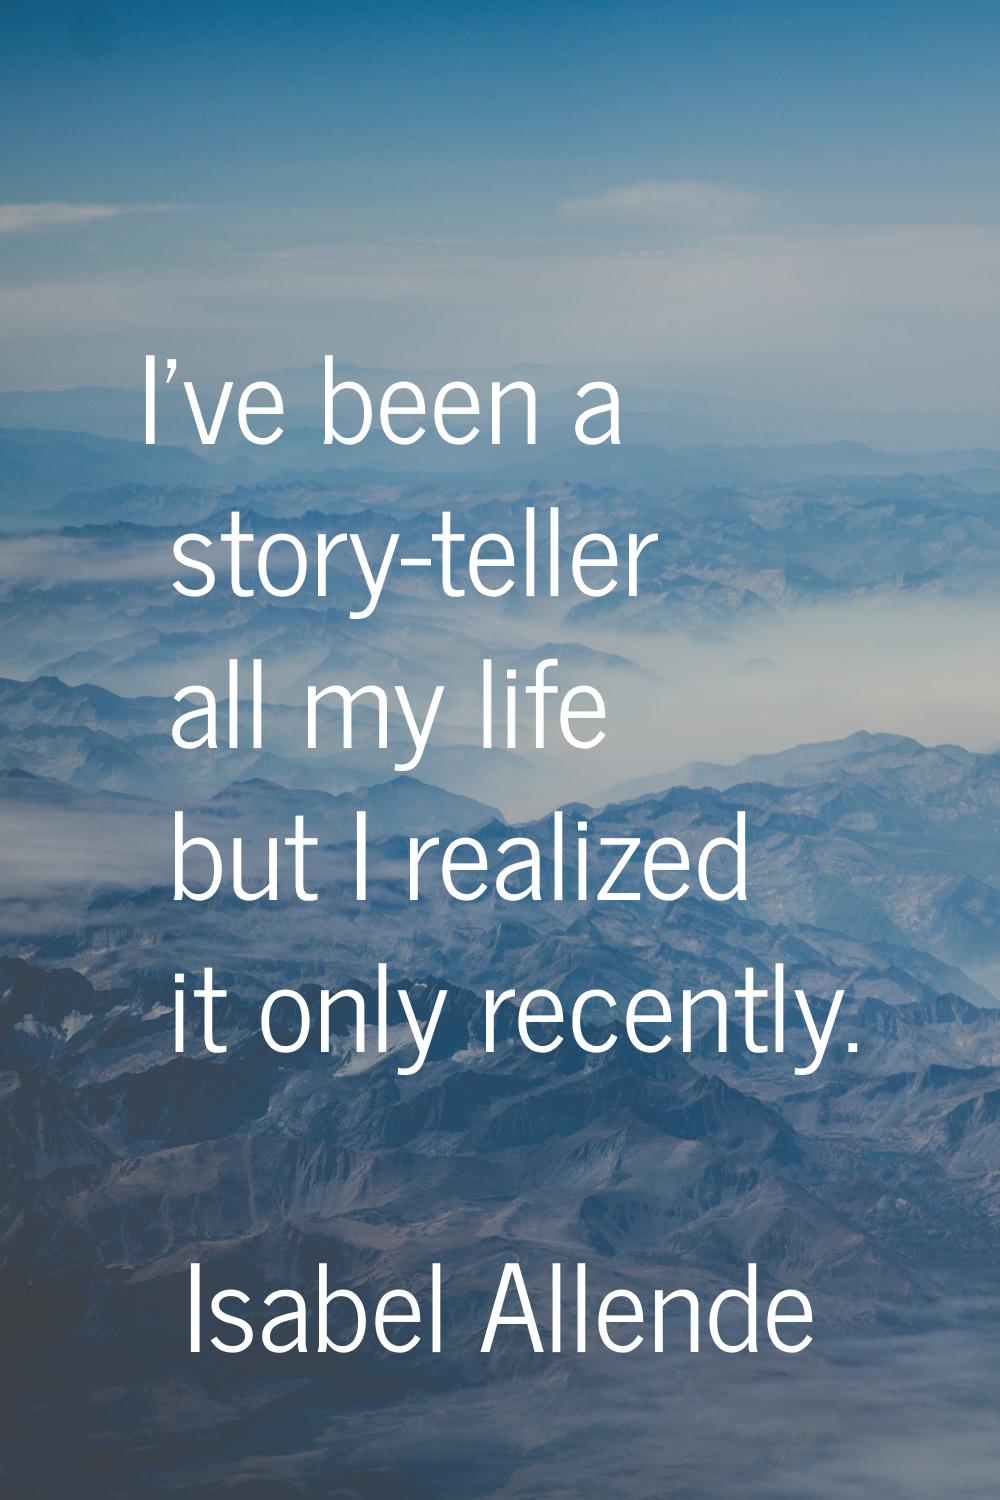 I've been a story-teller all my life but I realized it only recently.